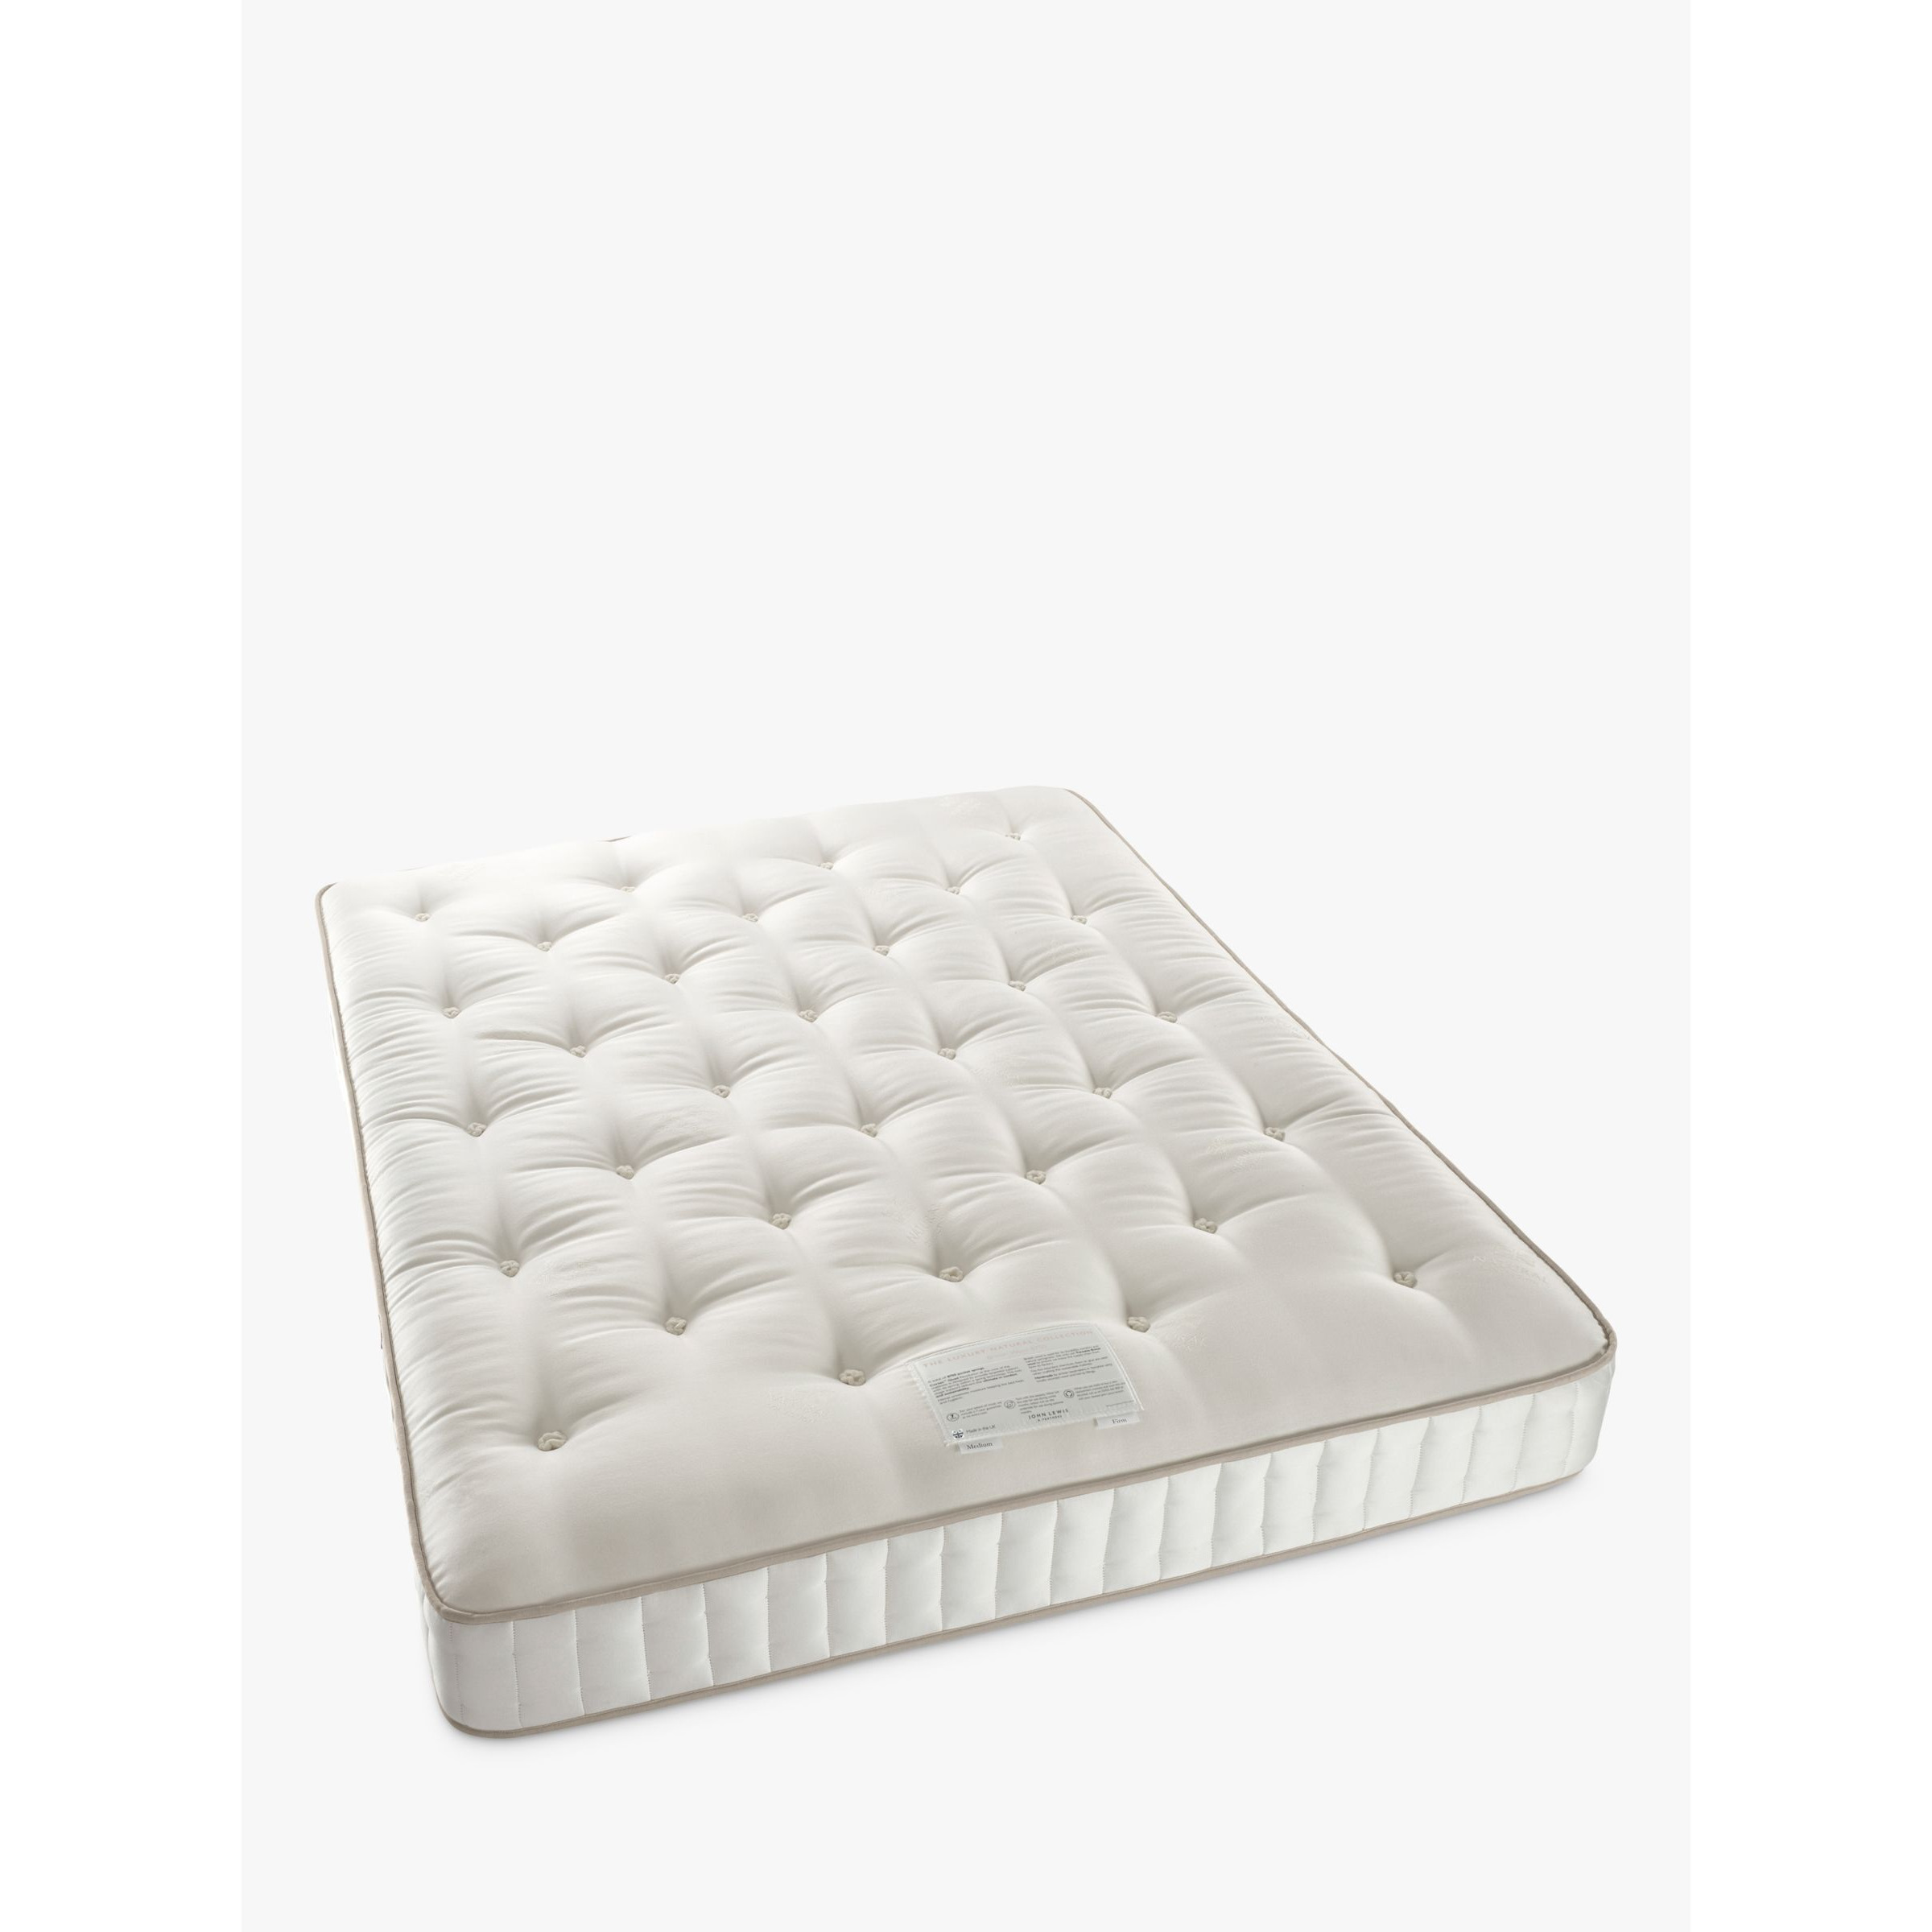 John Lewis Luxury Natural Collection Egyptian Cotton 5750, Small Double, Firmer Tension Pocket Spring Mattress - image 1